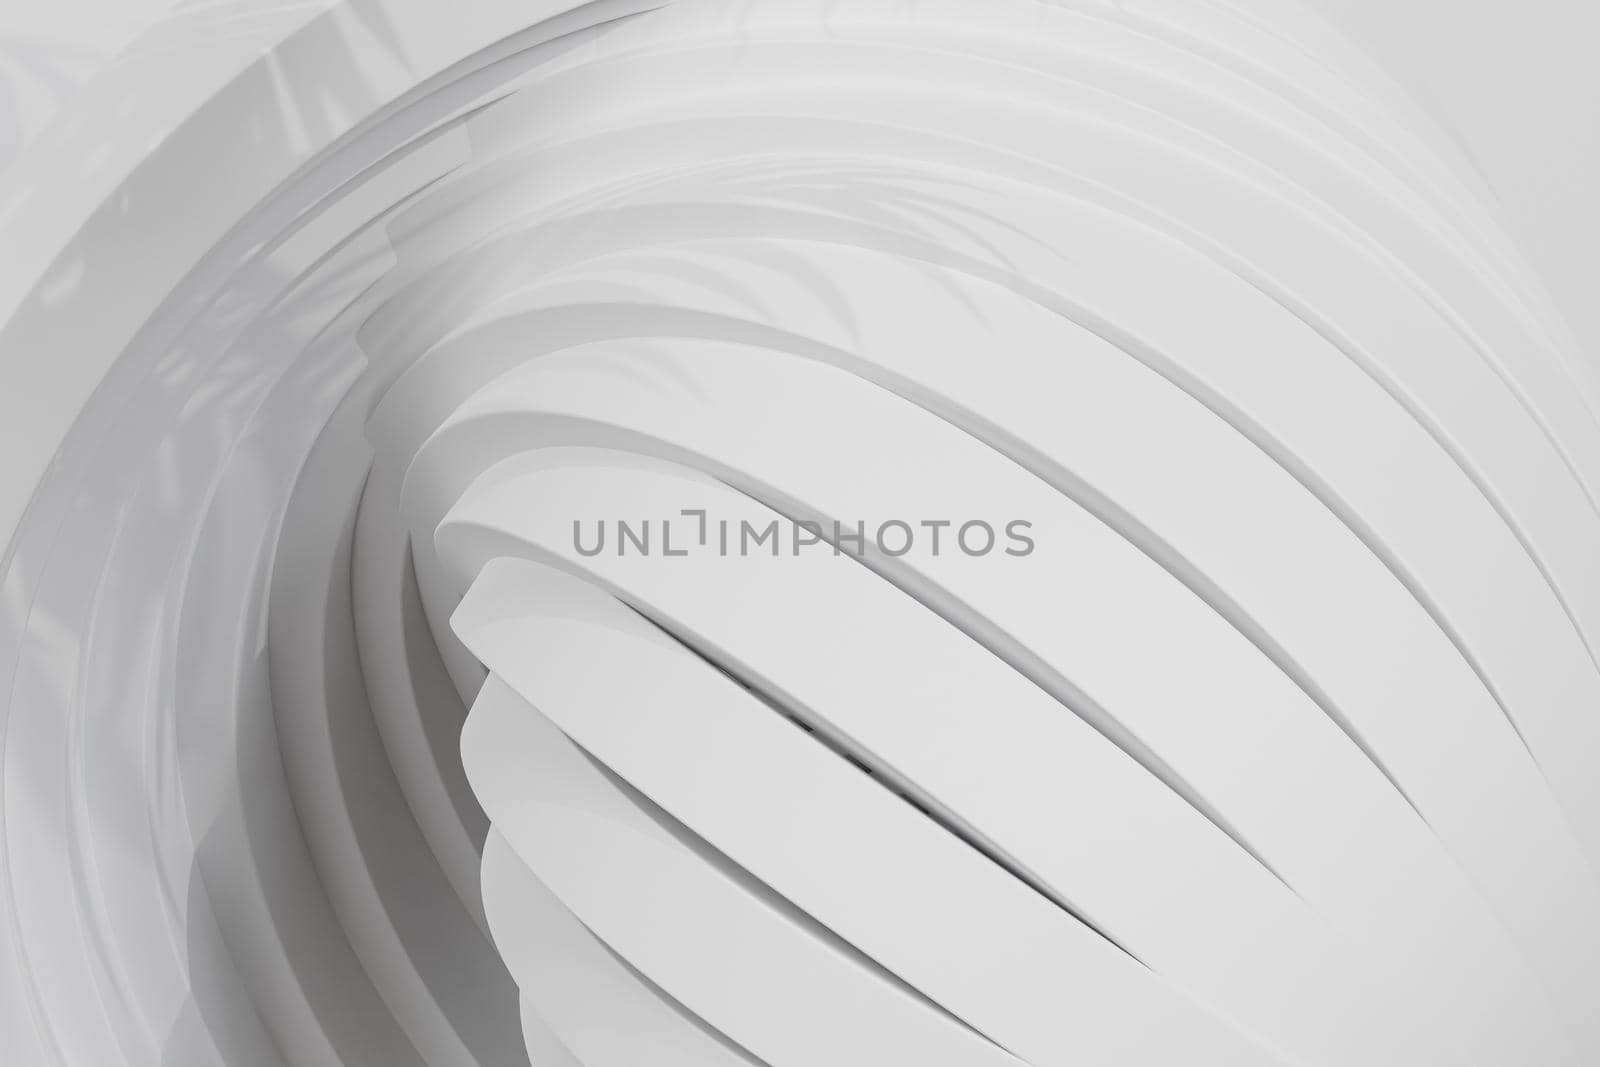 White abstract geometric background with rings or circles with tropical leaf shadow, 3d render